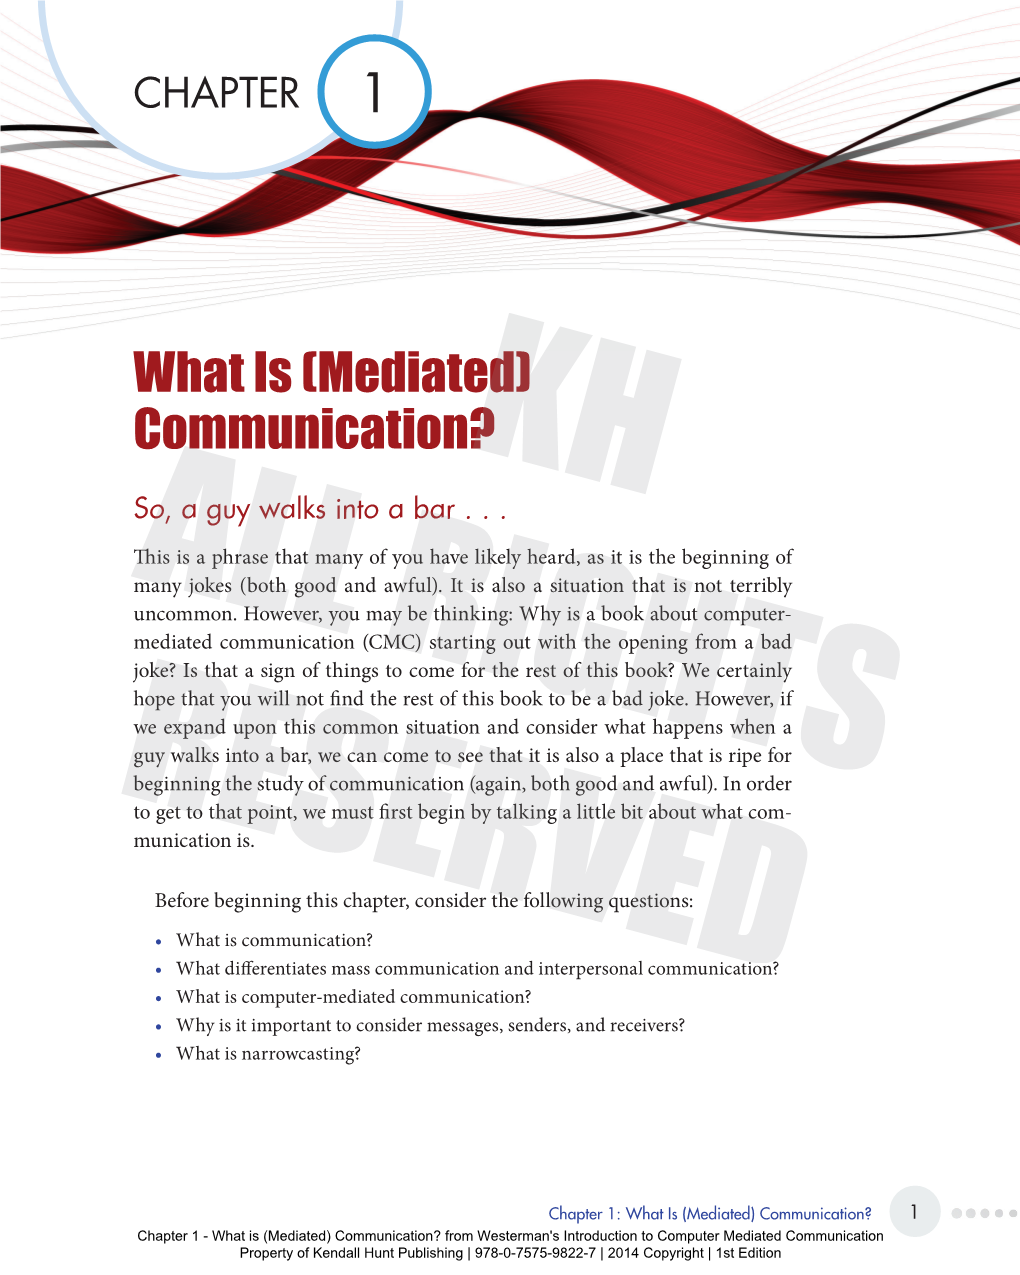 What Is (Mediated) Communication?